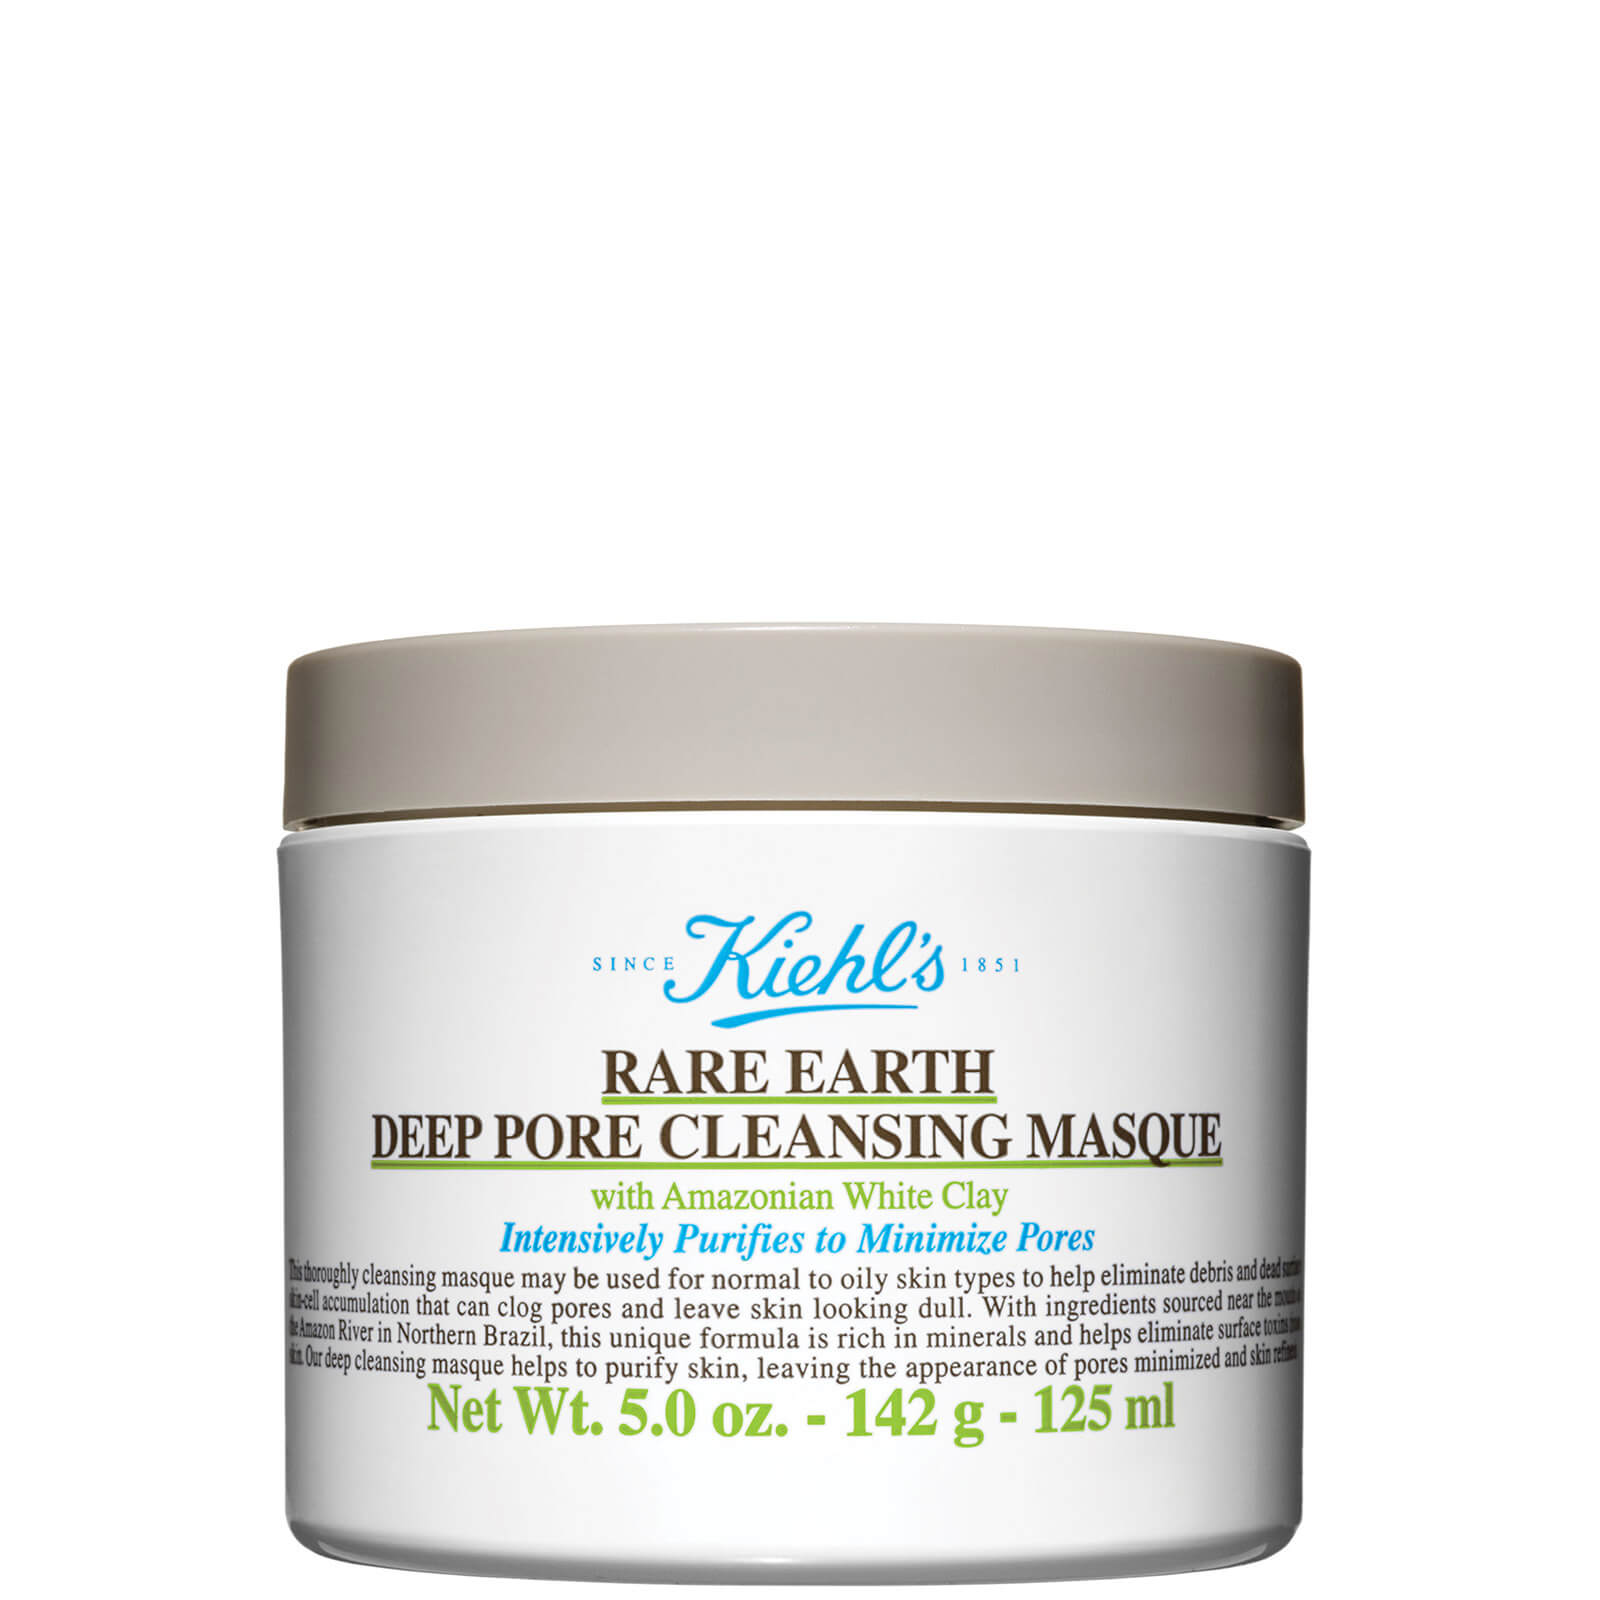 Photos - Facial / Body Cleansing Product Kiehl's Rare Earth Deep Pore Cleansing Masque 125ml